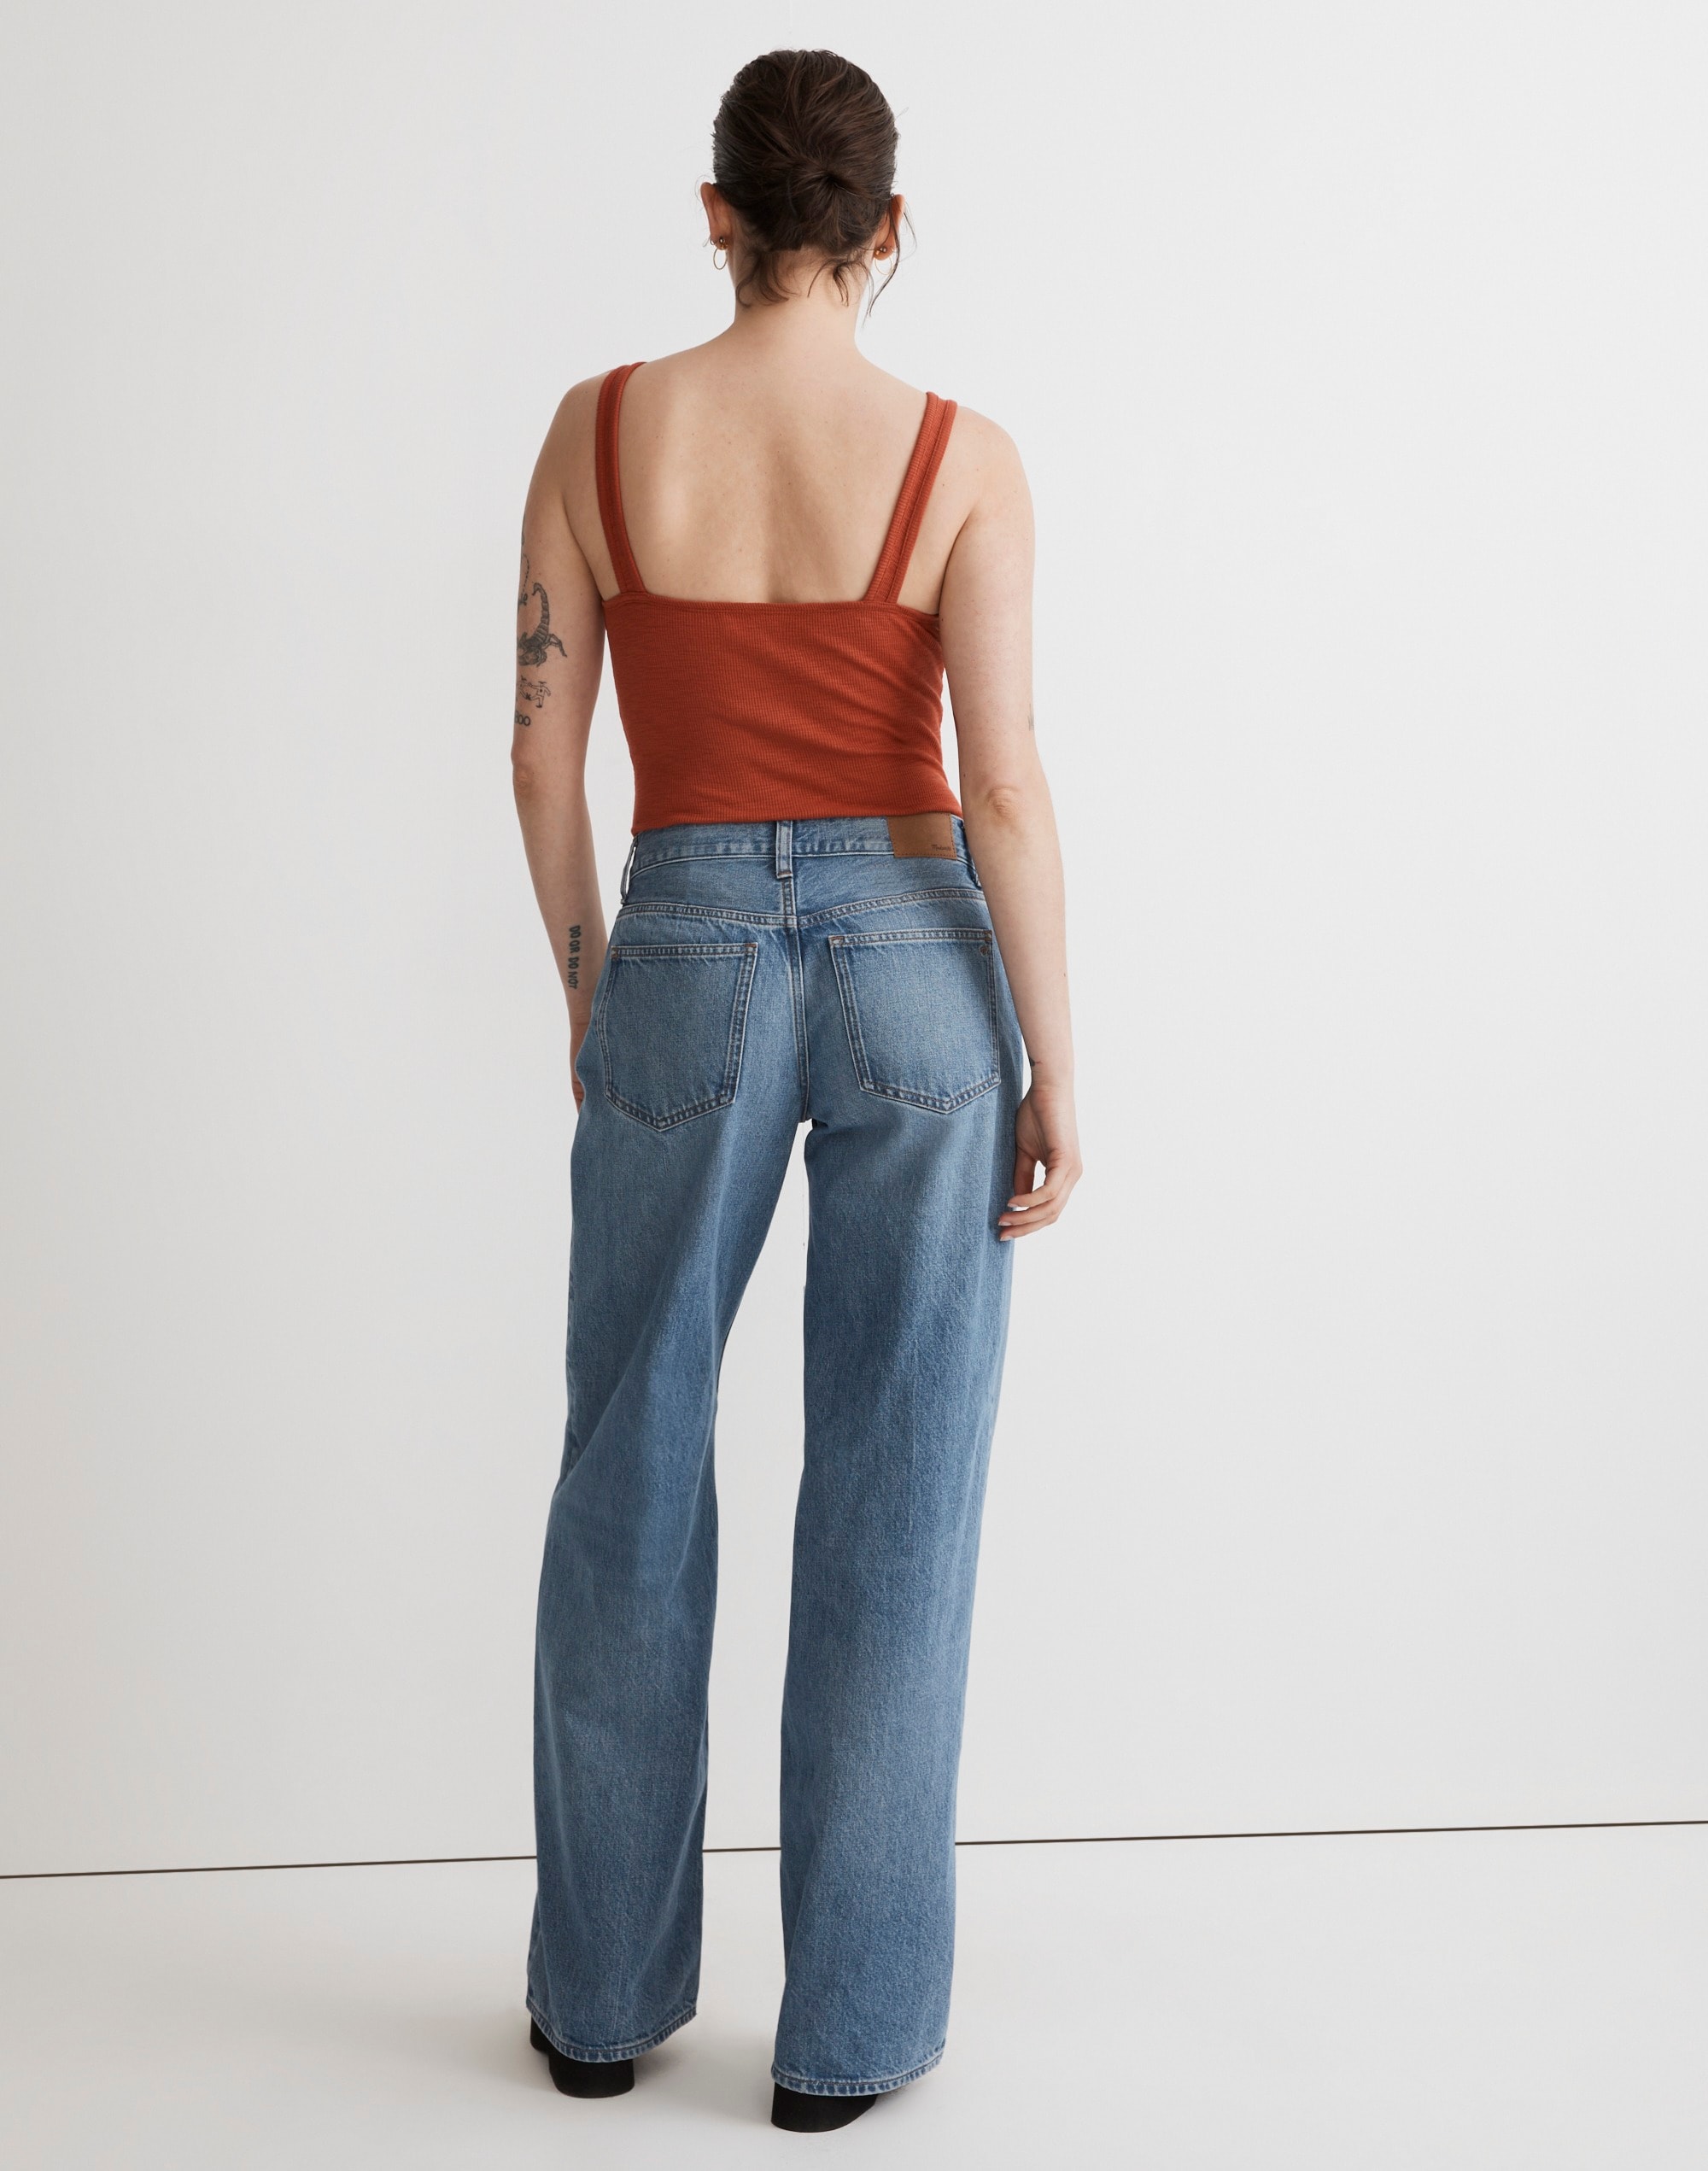 Low-Rise Superwide-Leg Jeans in Mainview Wash